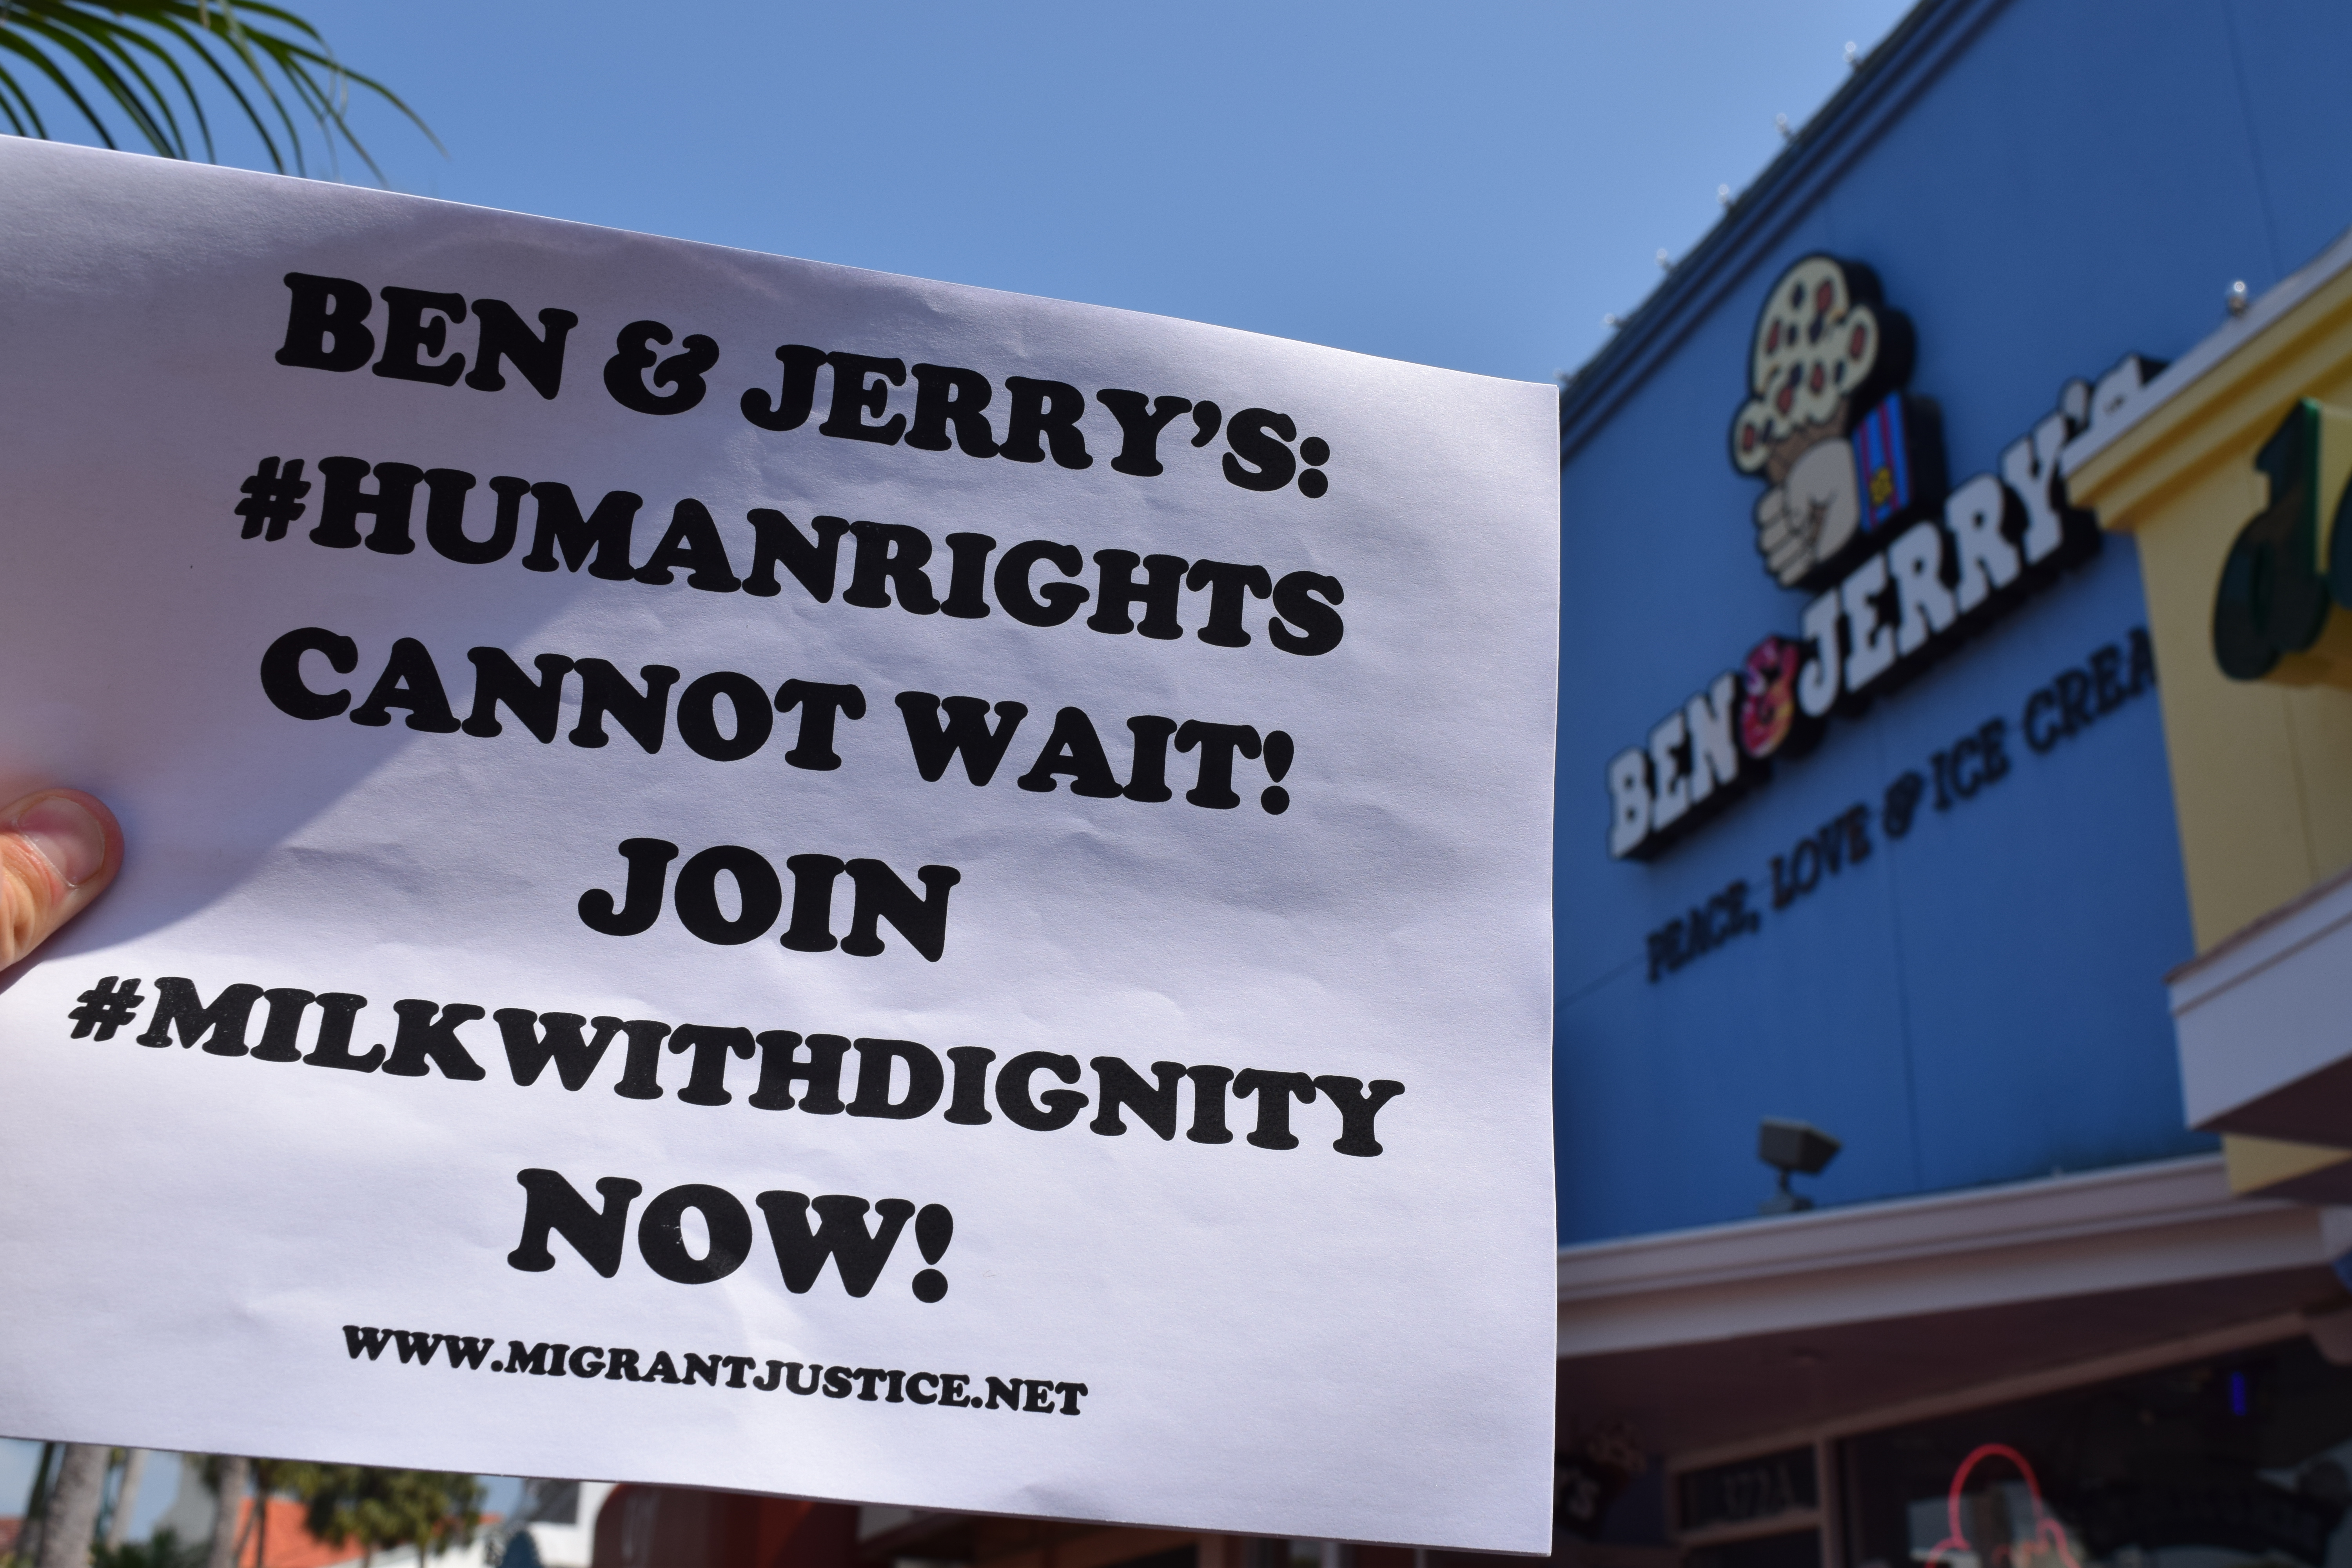 “Got Dignity?”: Students spread awareness of Milk with Dignity Program at local Ben & Jerry’s